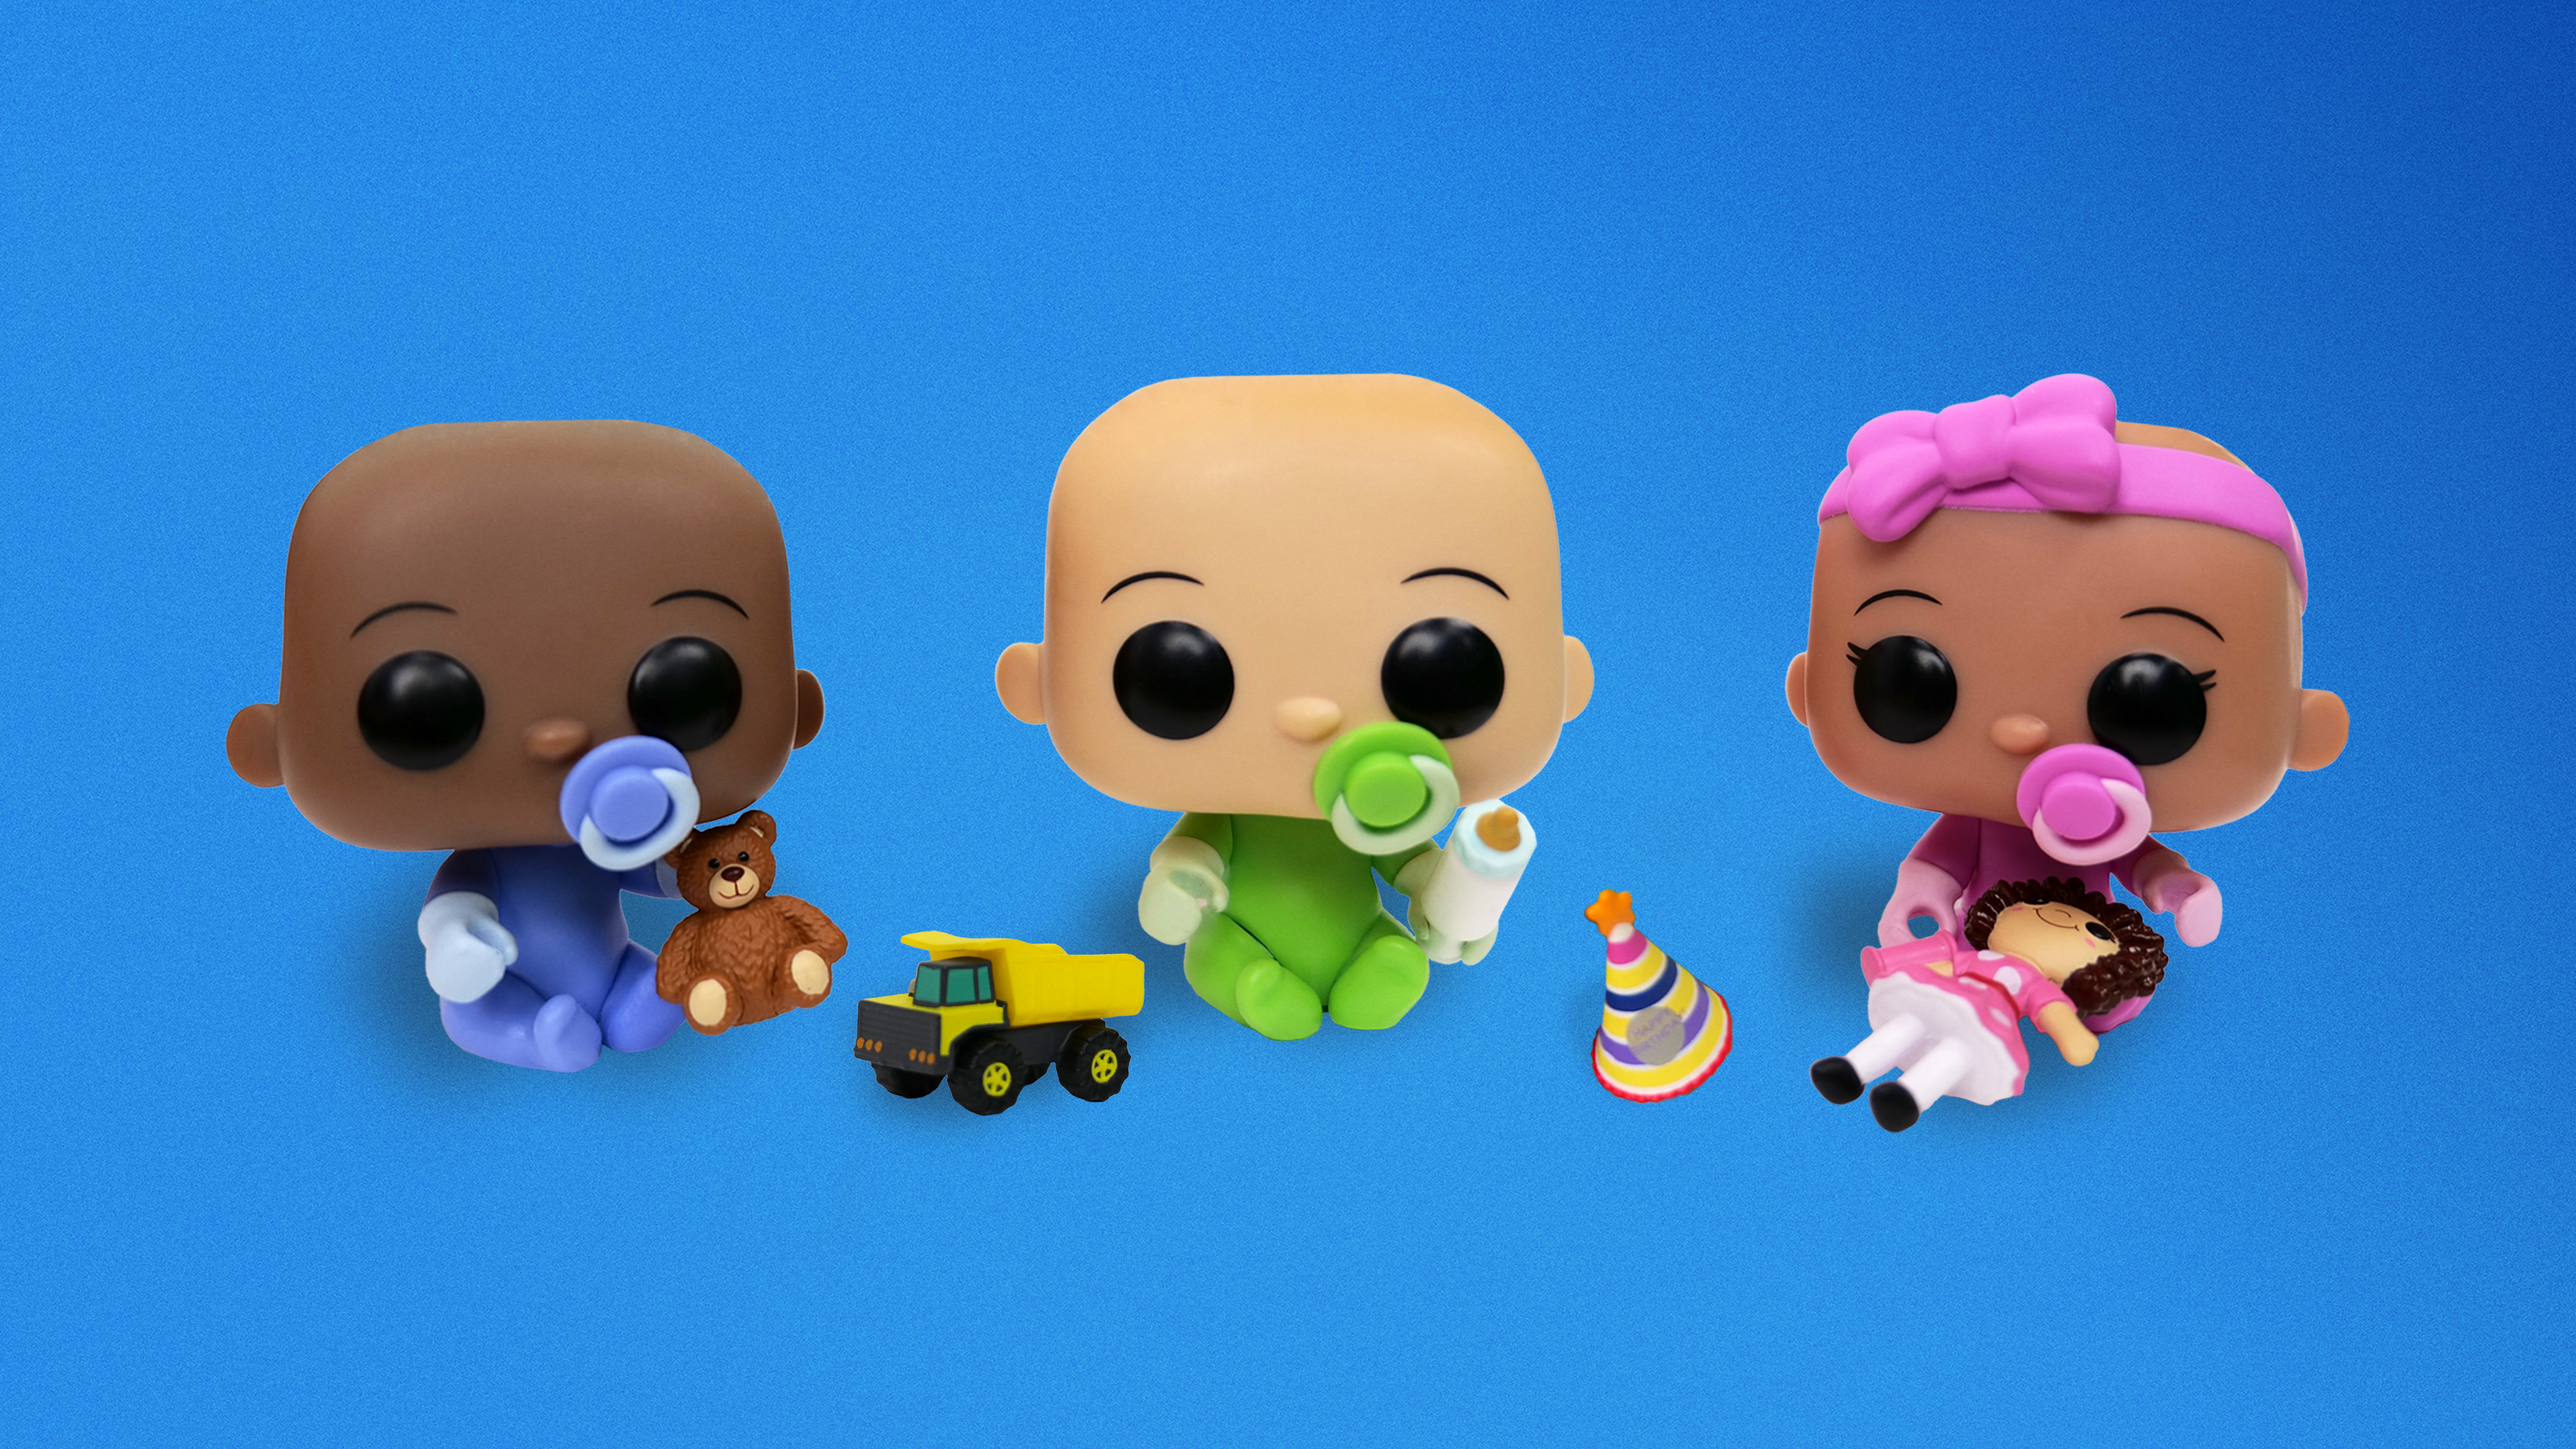 Three Pop! Yourself Babies of different skin tones, sit side by side with tiny accessories including a teddy bear, toy truck, bottle, birthday hat, and doll.